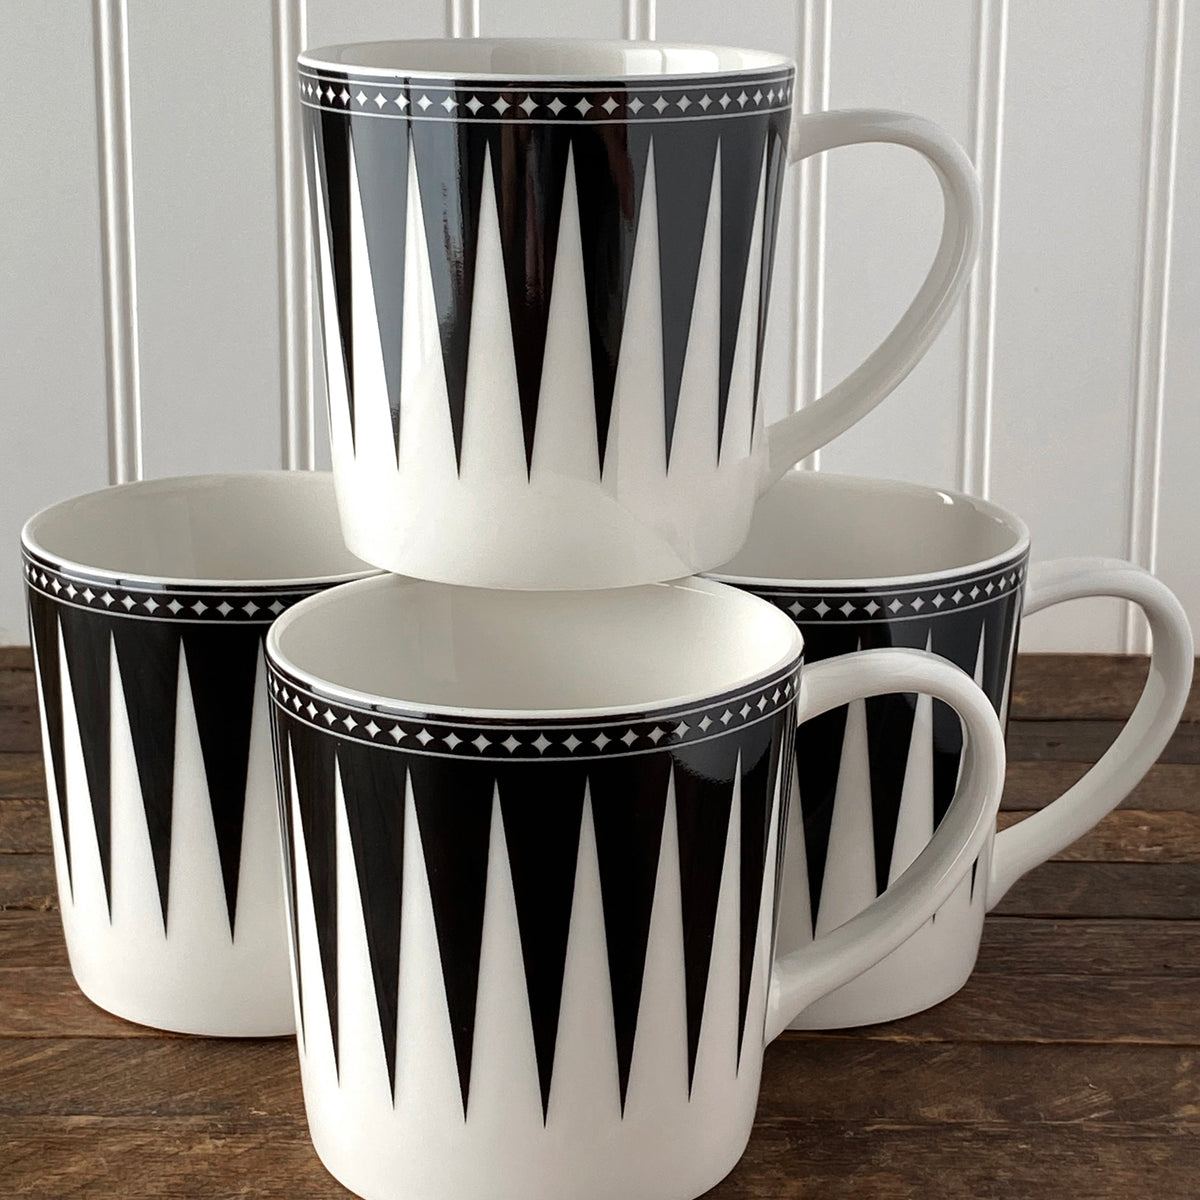 Four Marrakech Mug Black ceramic mugs stacked on top of each other.